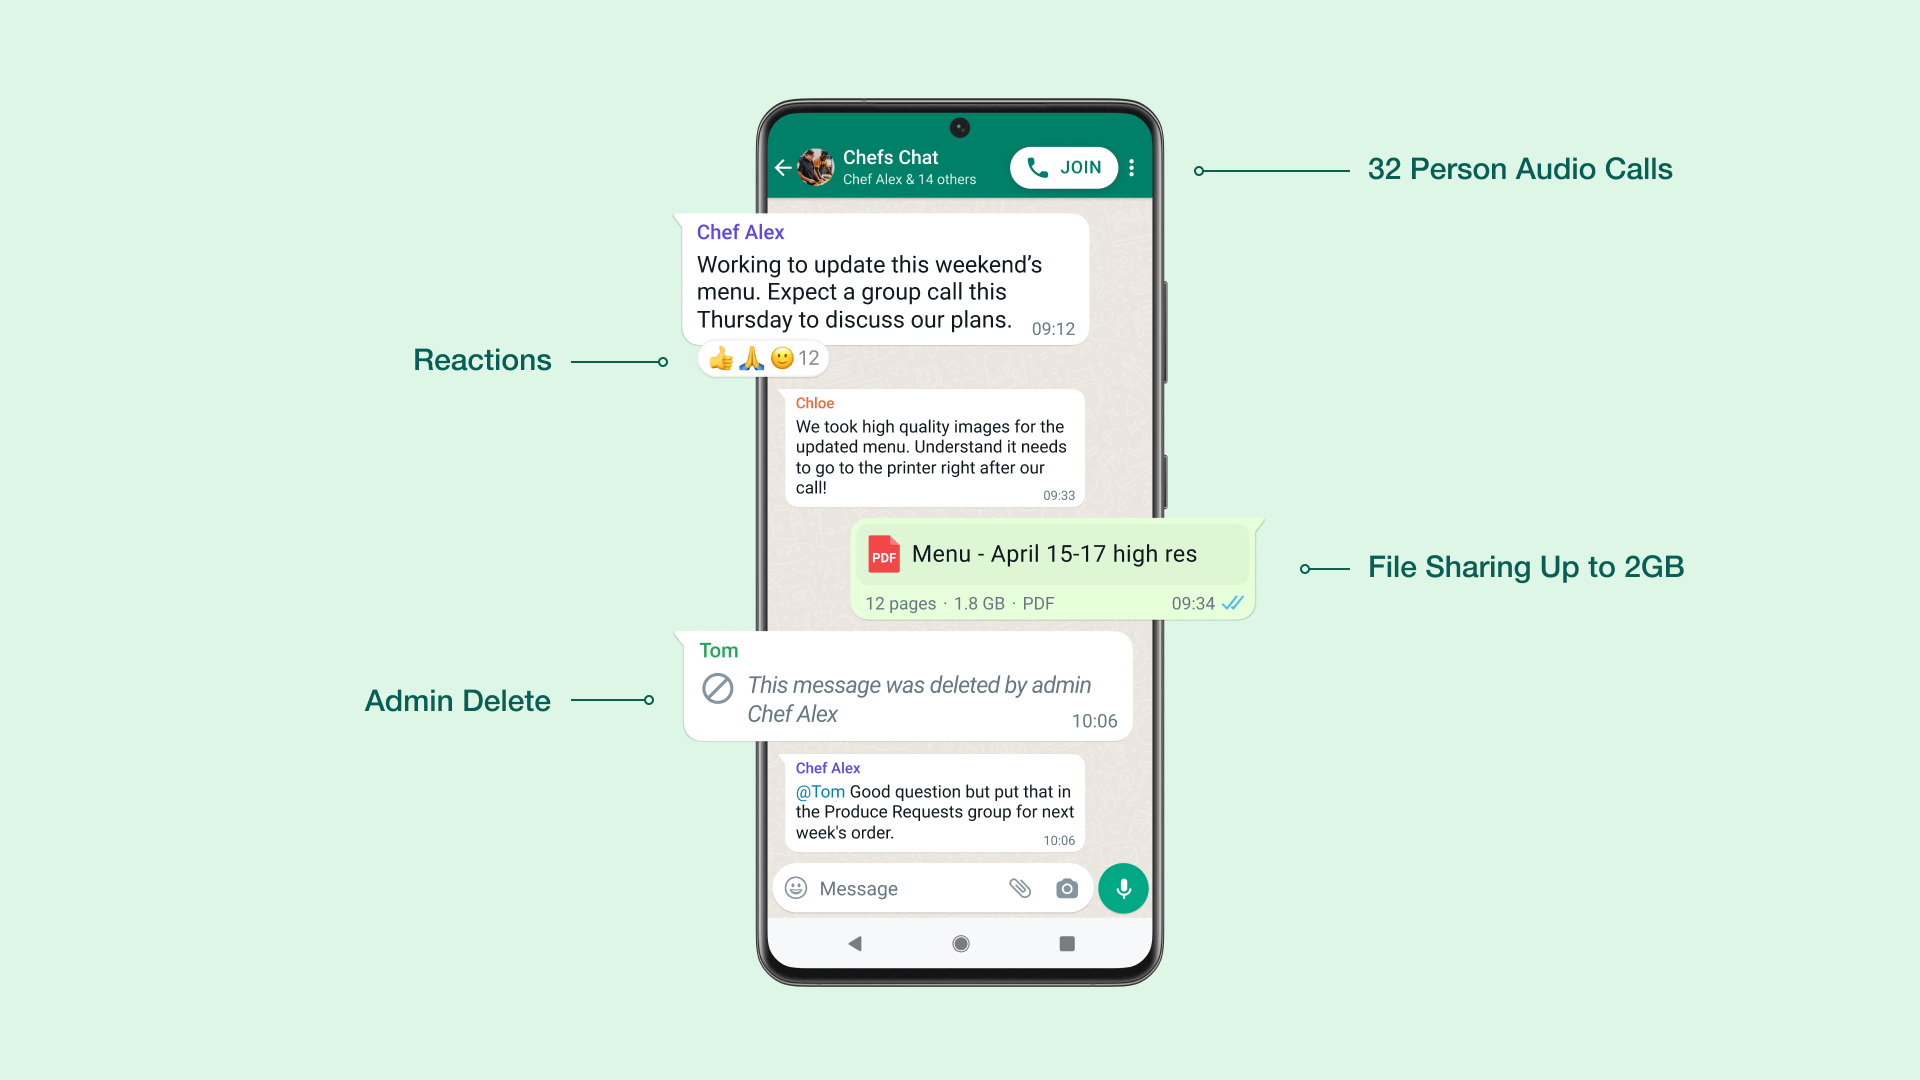 Meta's marketing image showcasing four new features for WhatsApp groups: Emoji reactions, admin delete, 32-person audio calls and file sharing up to 2GB